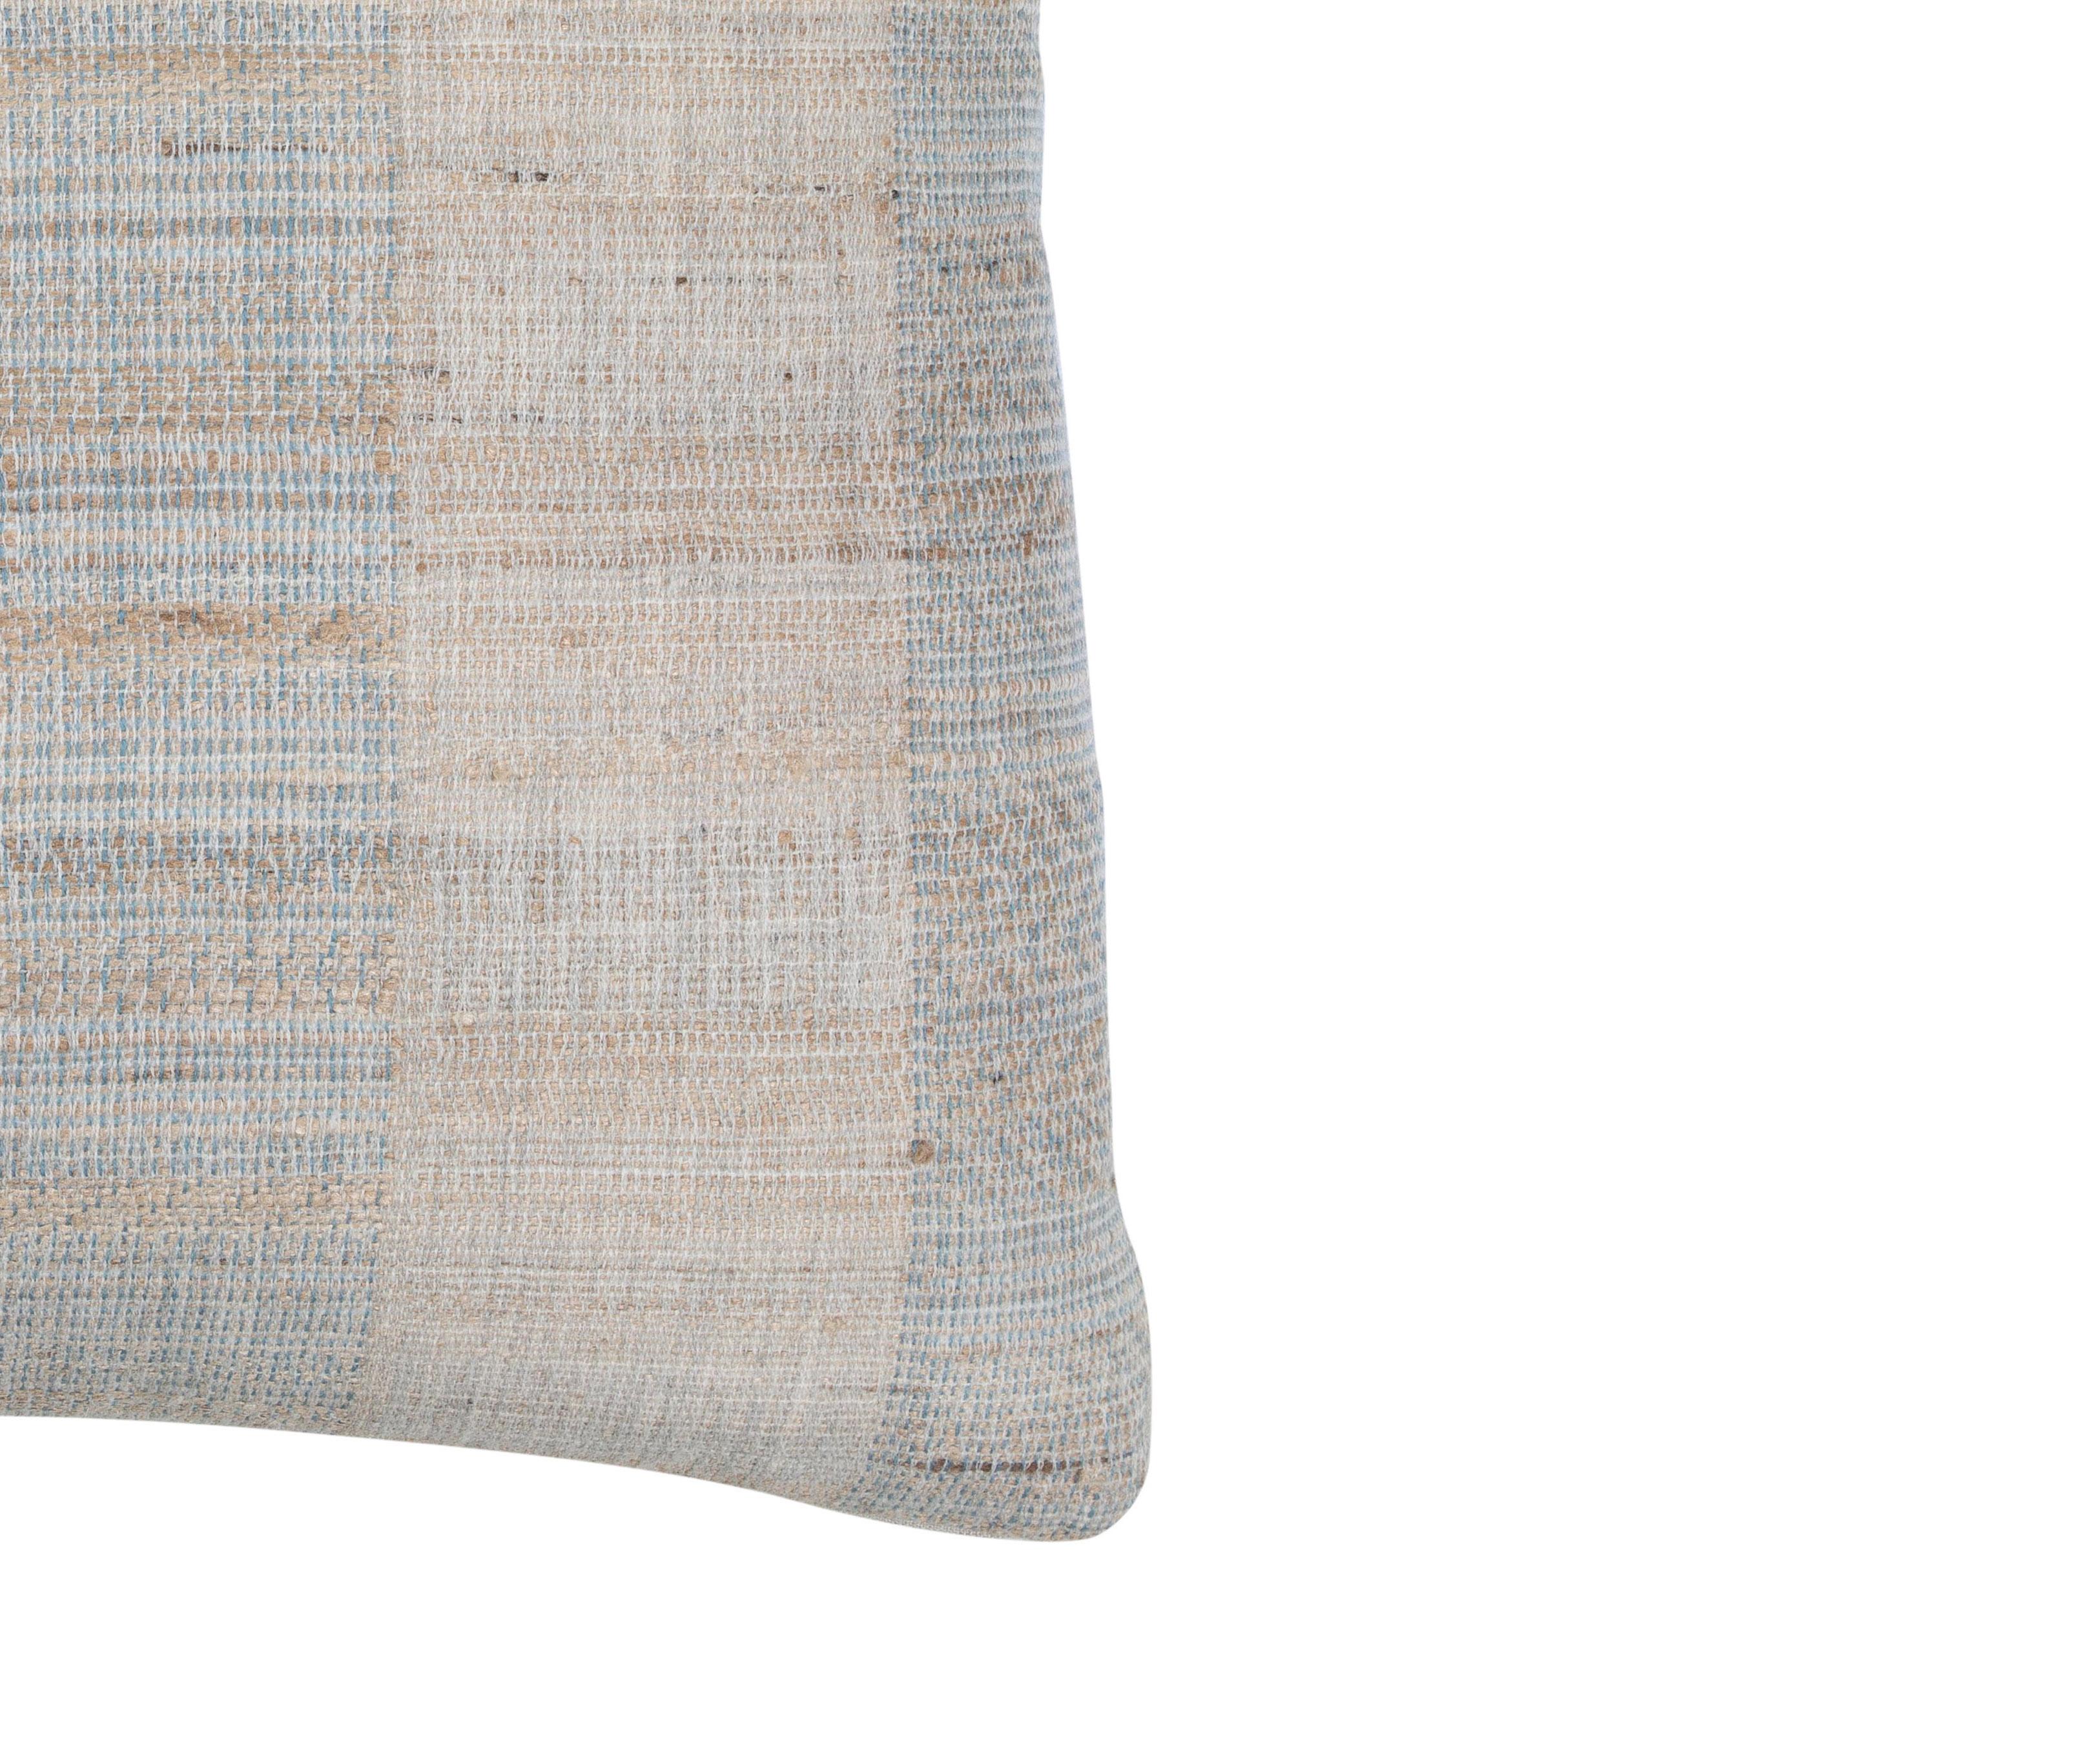 Hand-Woven Indian Handwoven Pillow Tan and Light Blue For Sale